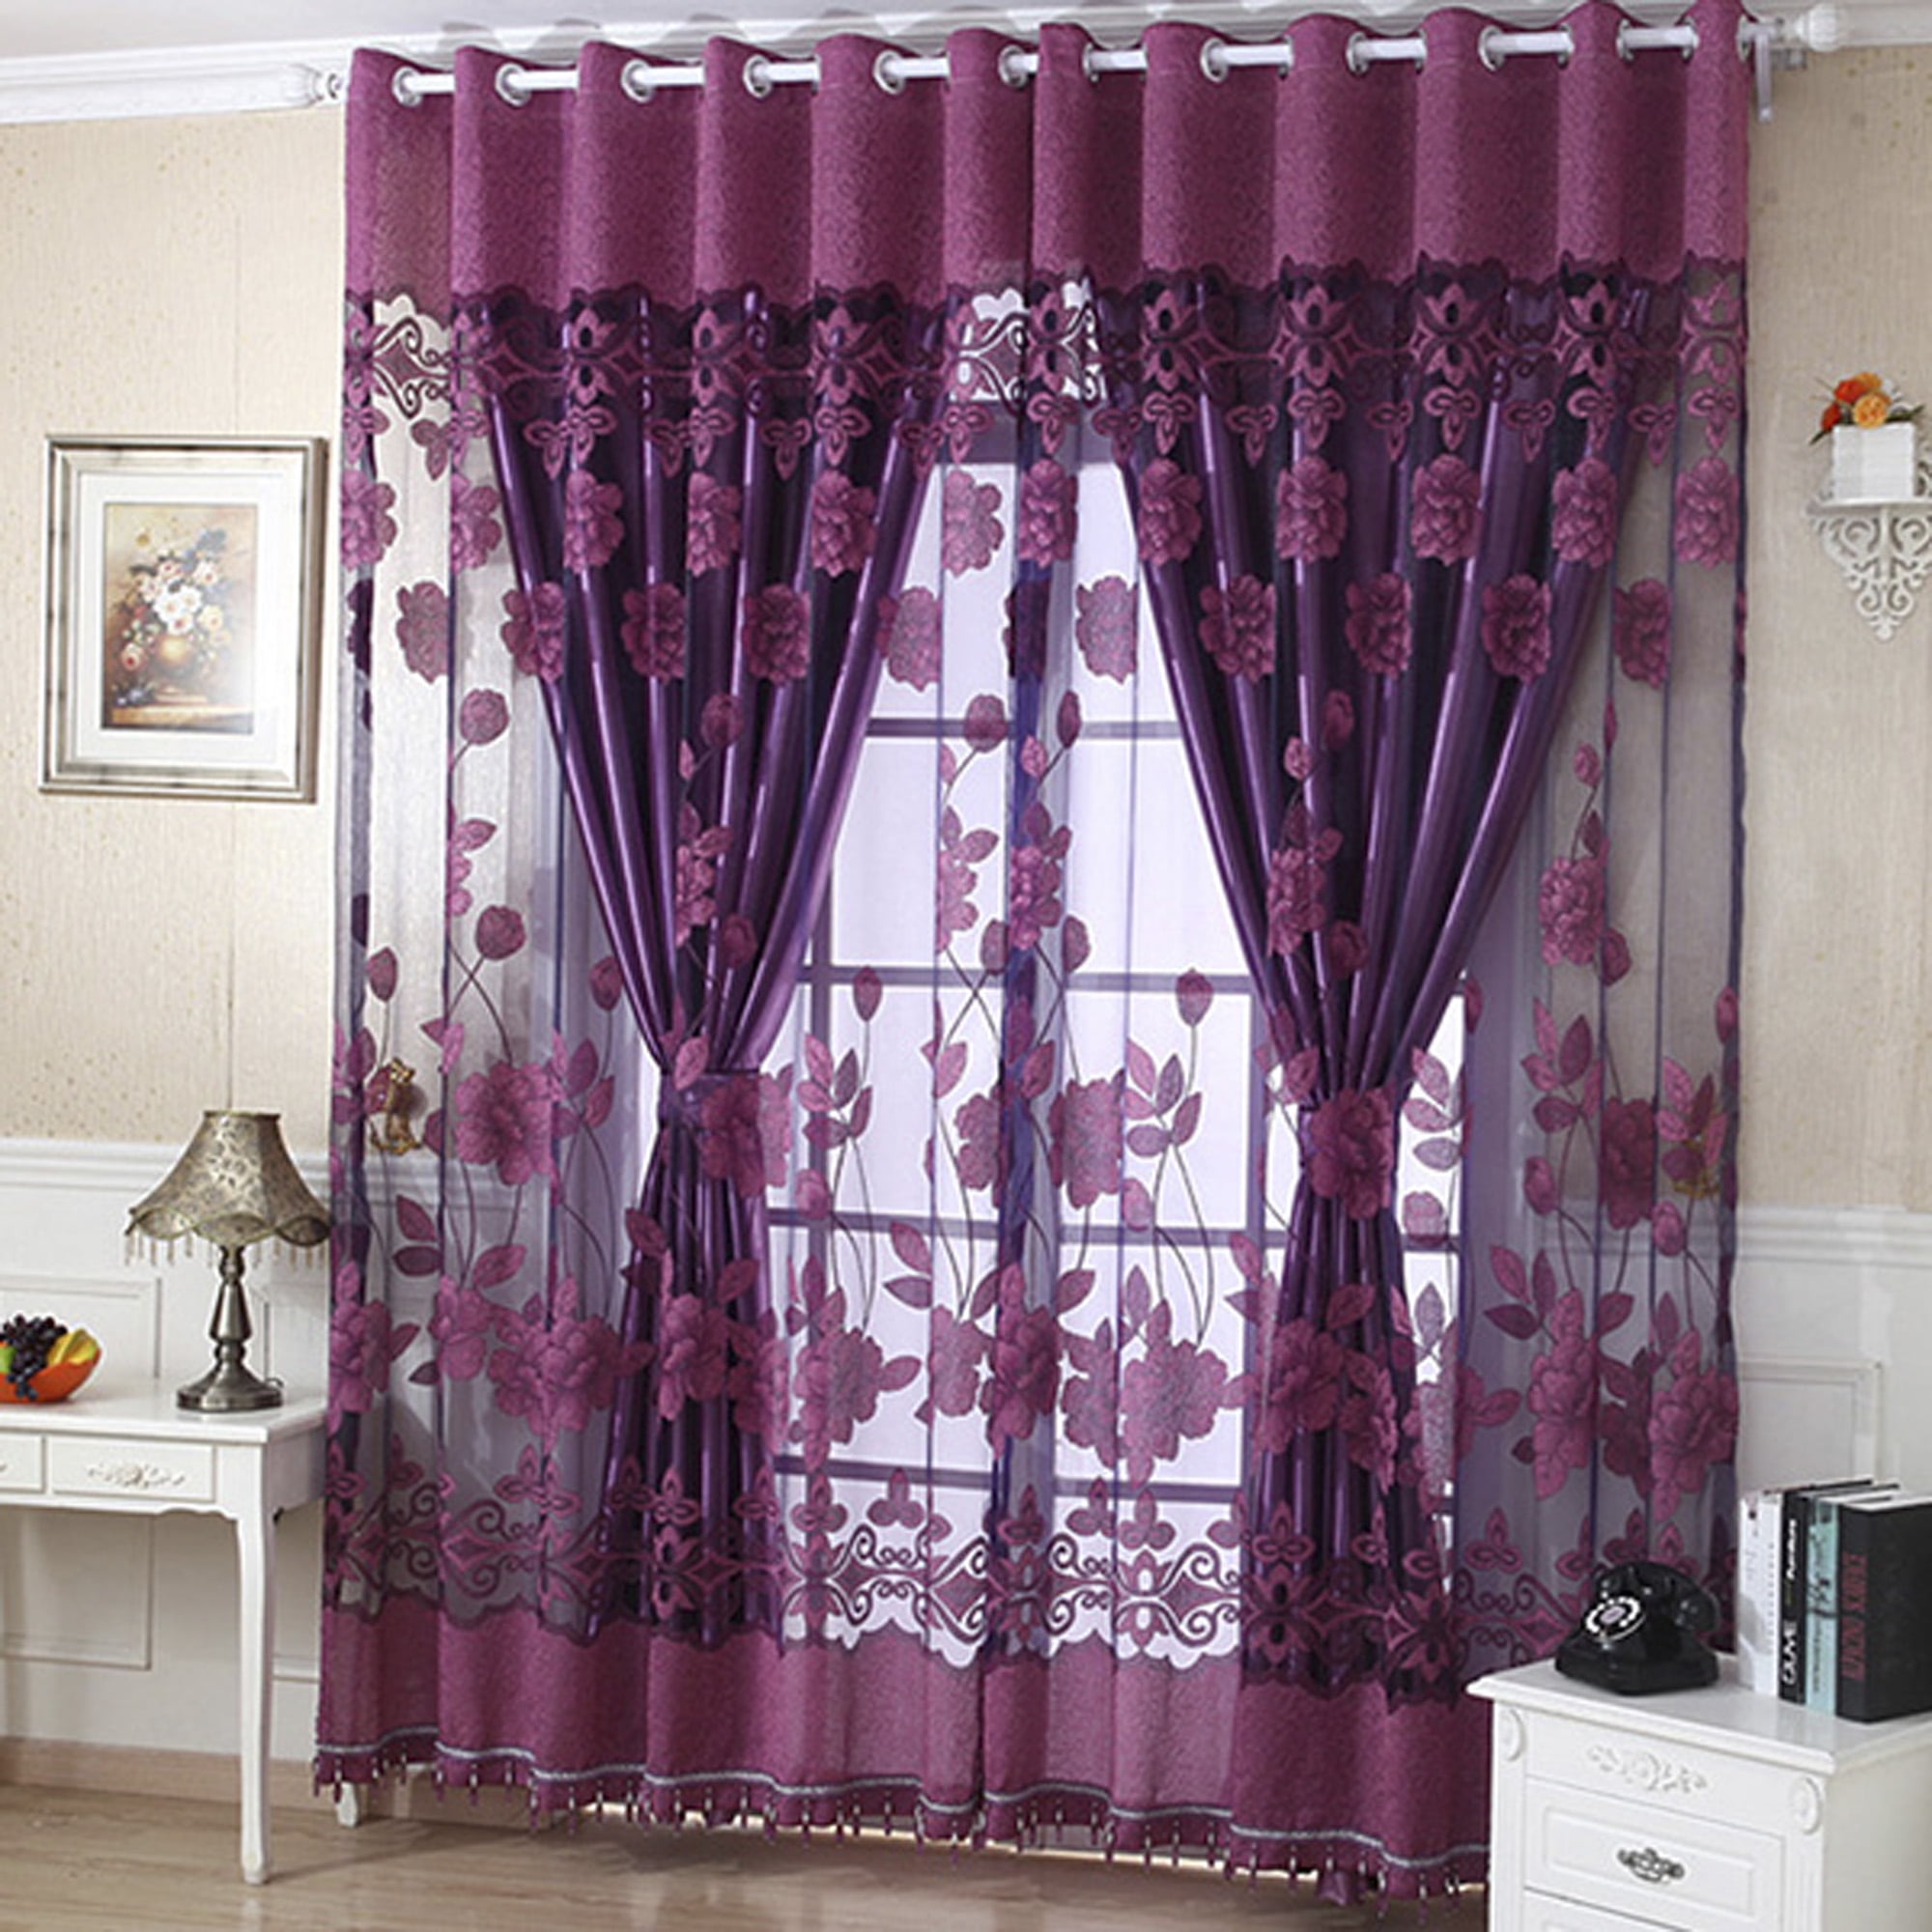 Details about   Scarf Panel Floral Drape Window Curtain Valances Living Room Tulle Sun Shade W 